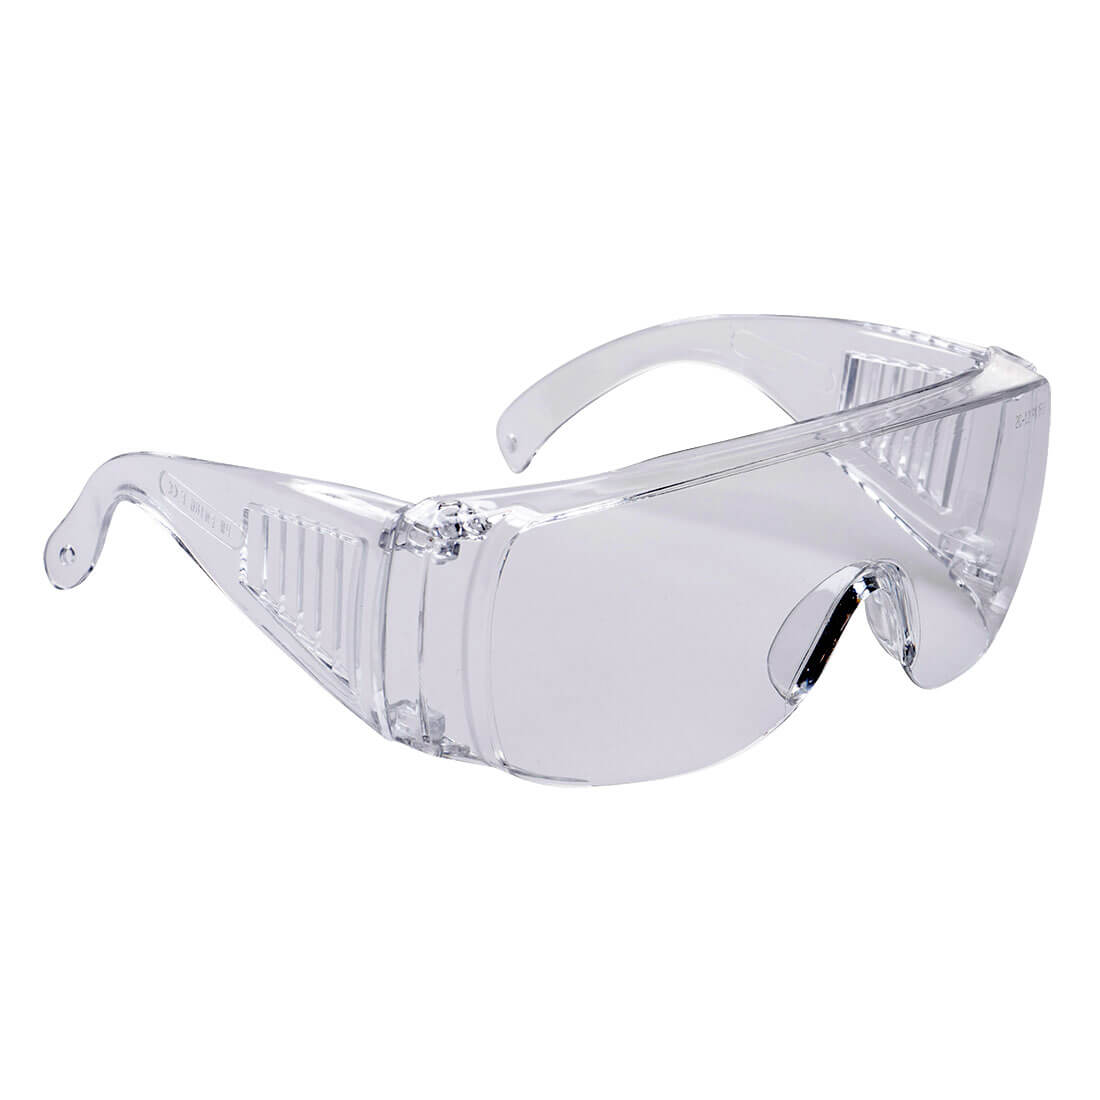 PW30 - Visitor Safety Spectacles